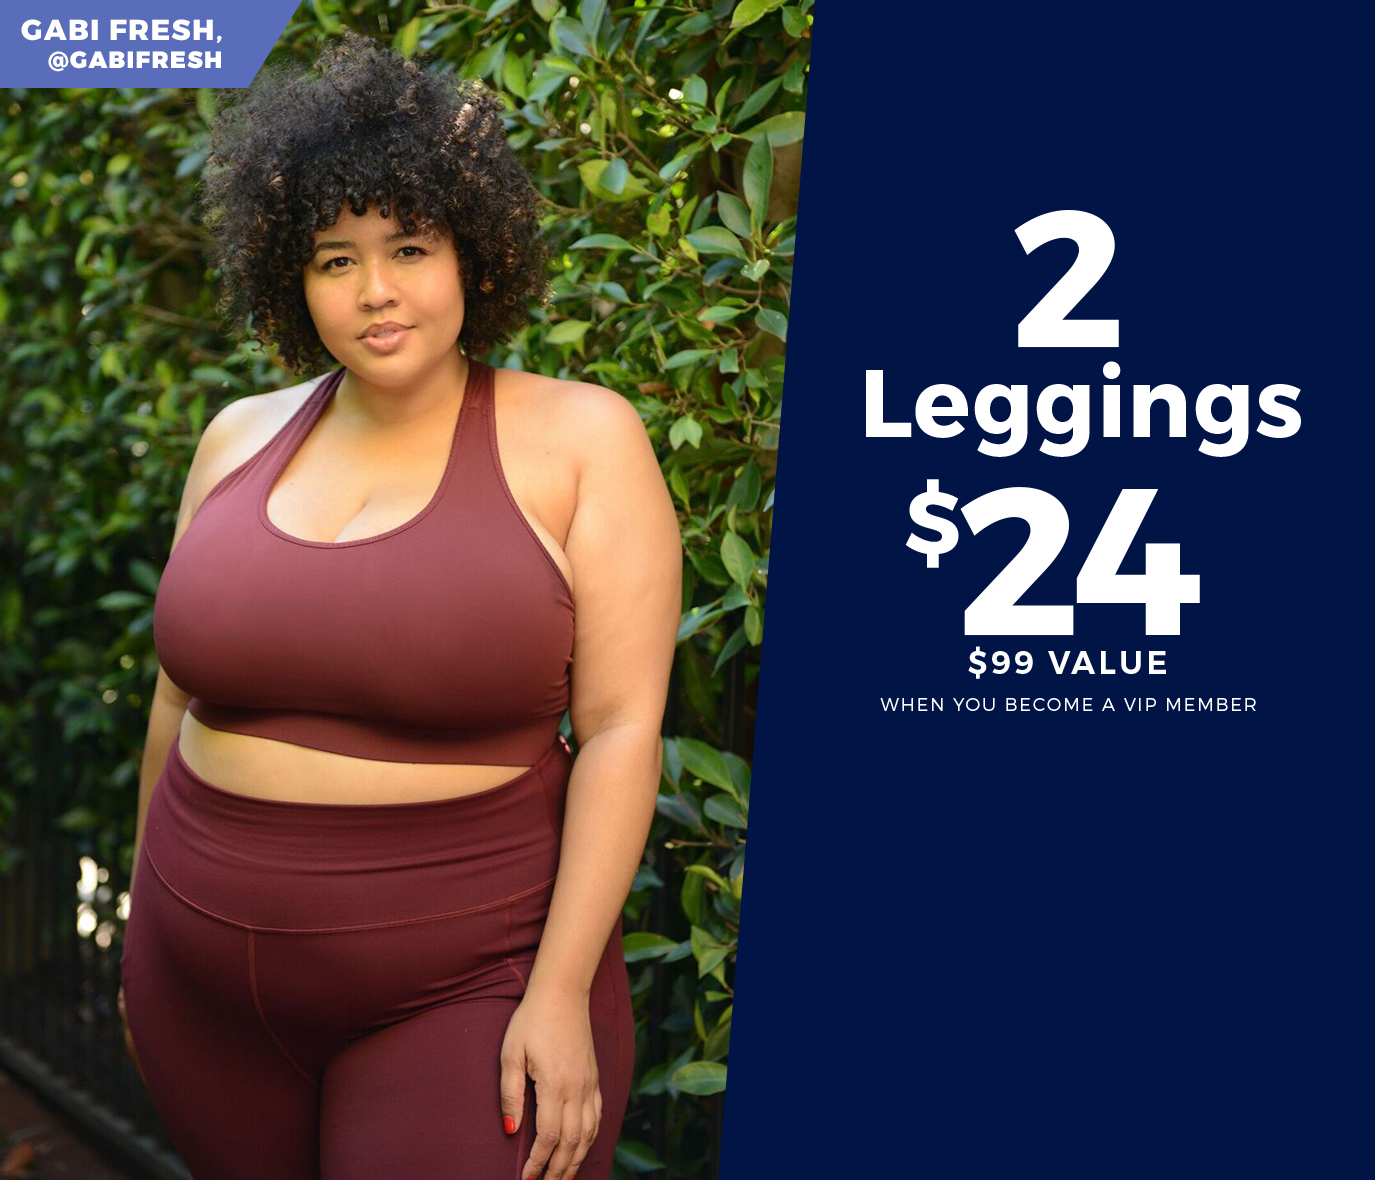 2 Leggings For $24 | When You Become a VIP Member